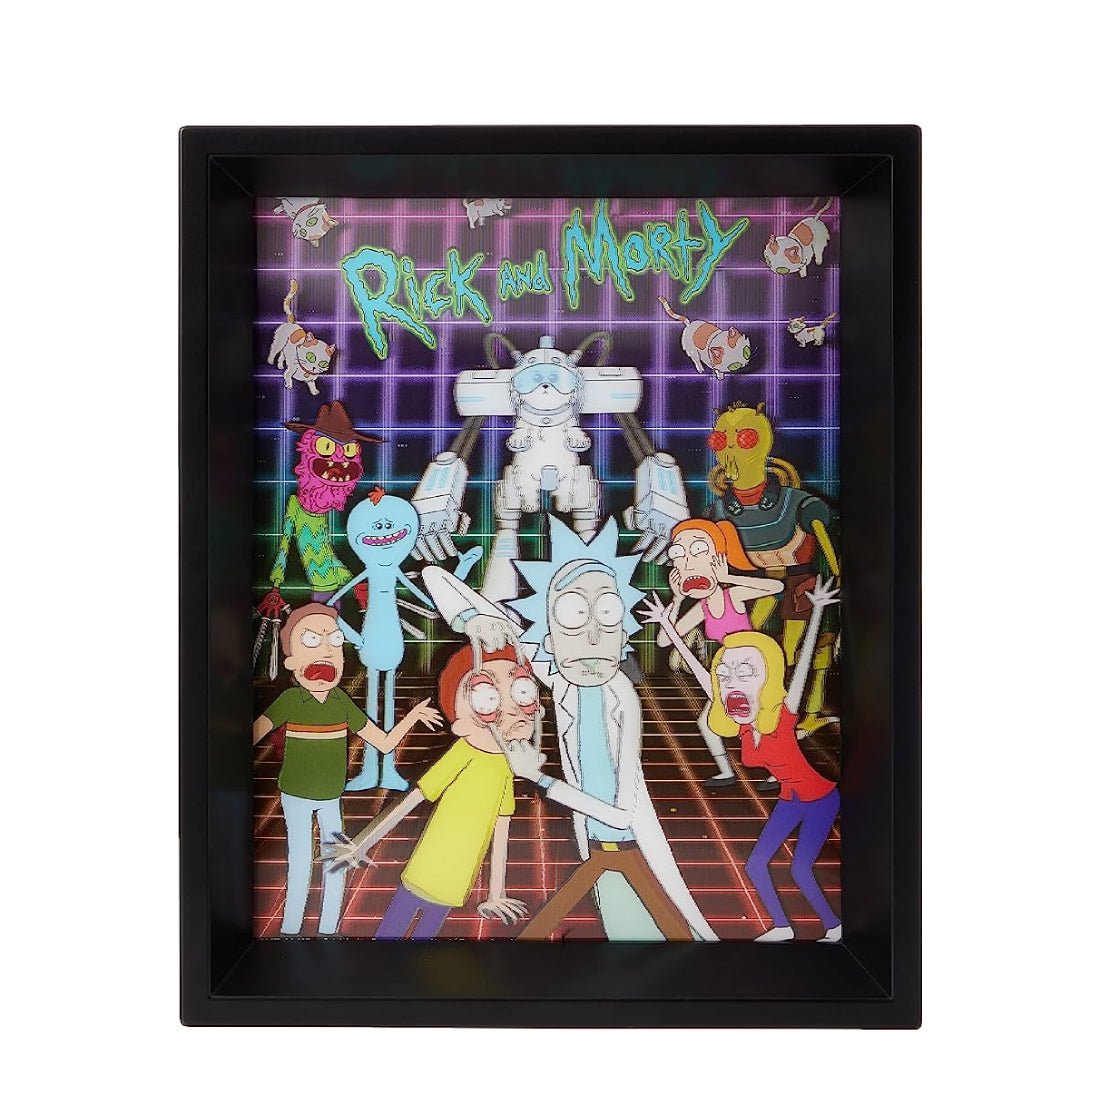 Rick And Morty - Characters Grid 3D Lenticular Posters - أكسسوار - Store 974 | ستور ٩٧٤